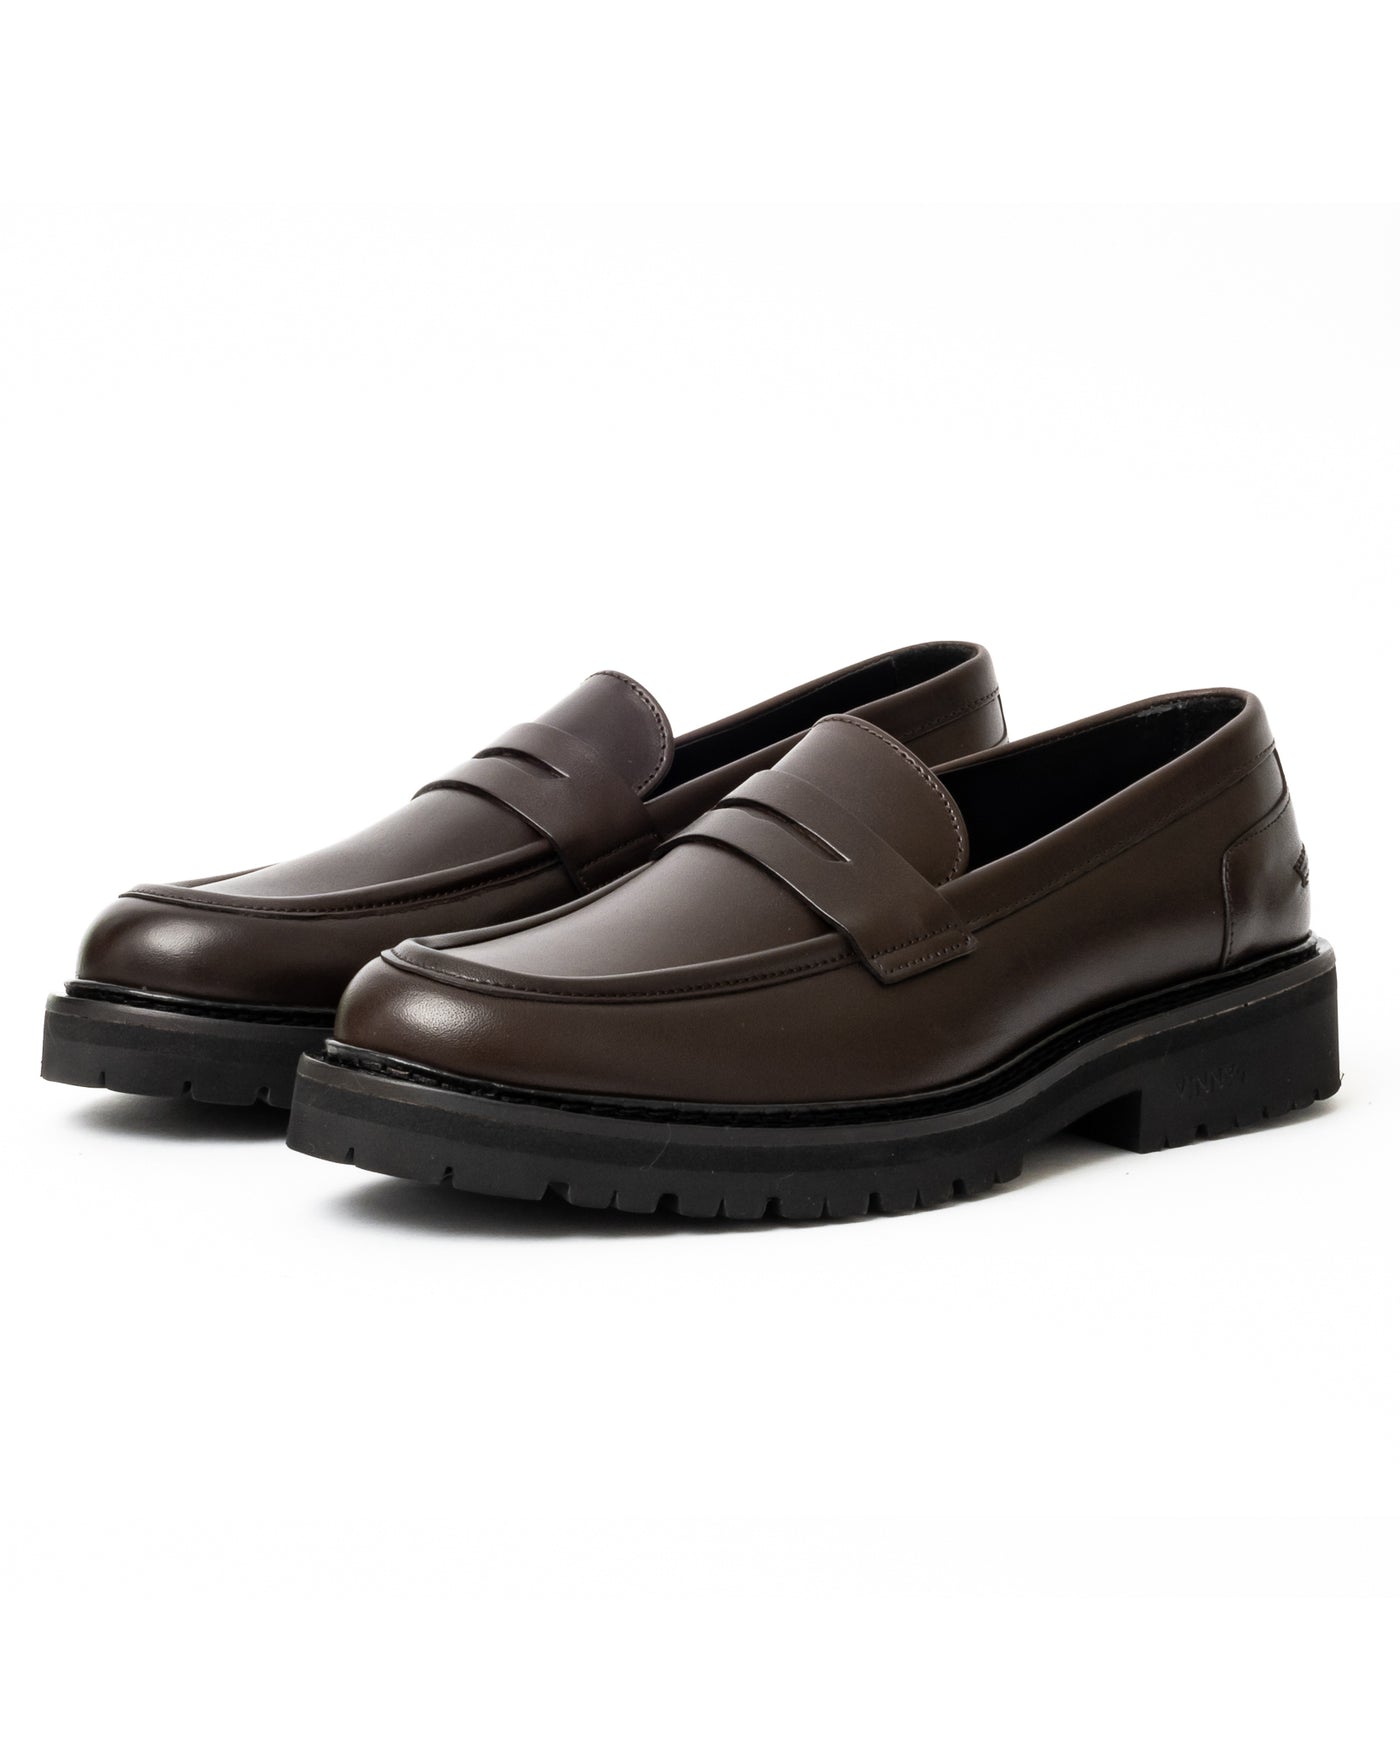 Vinny's Richee Penny Loafer Dark Brown Crust Leather